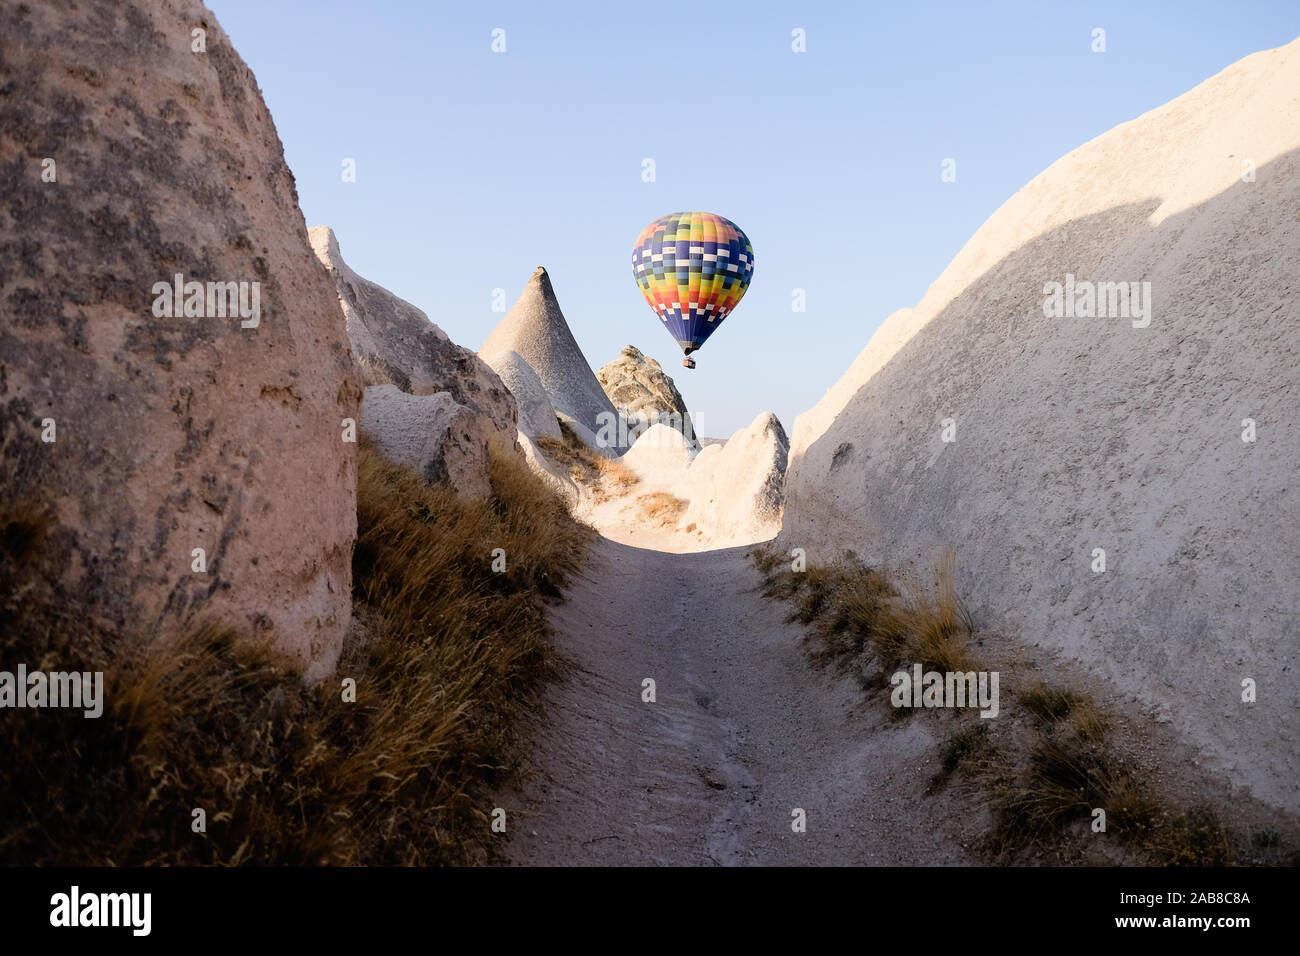 Single hot air balloon framed by rocks on a walking path Stock Photo